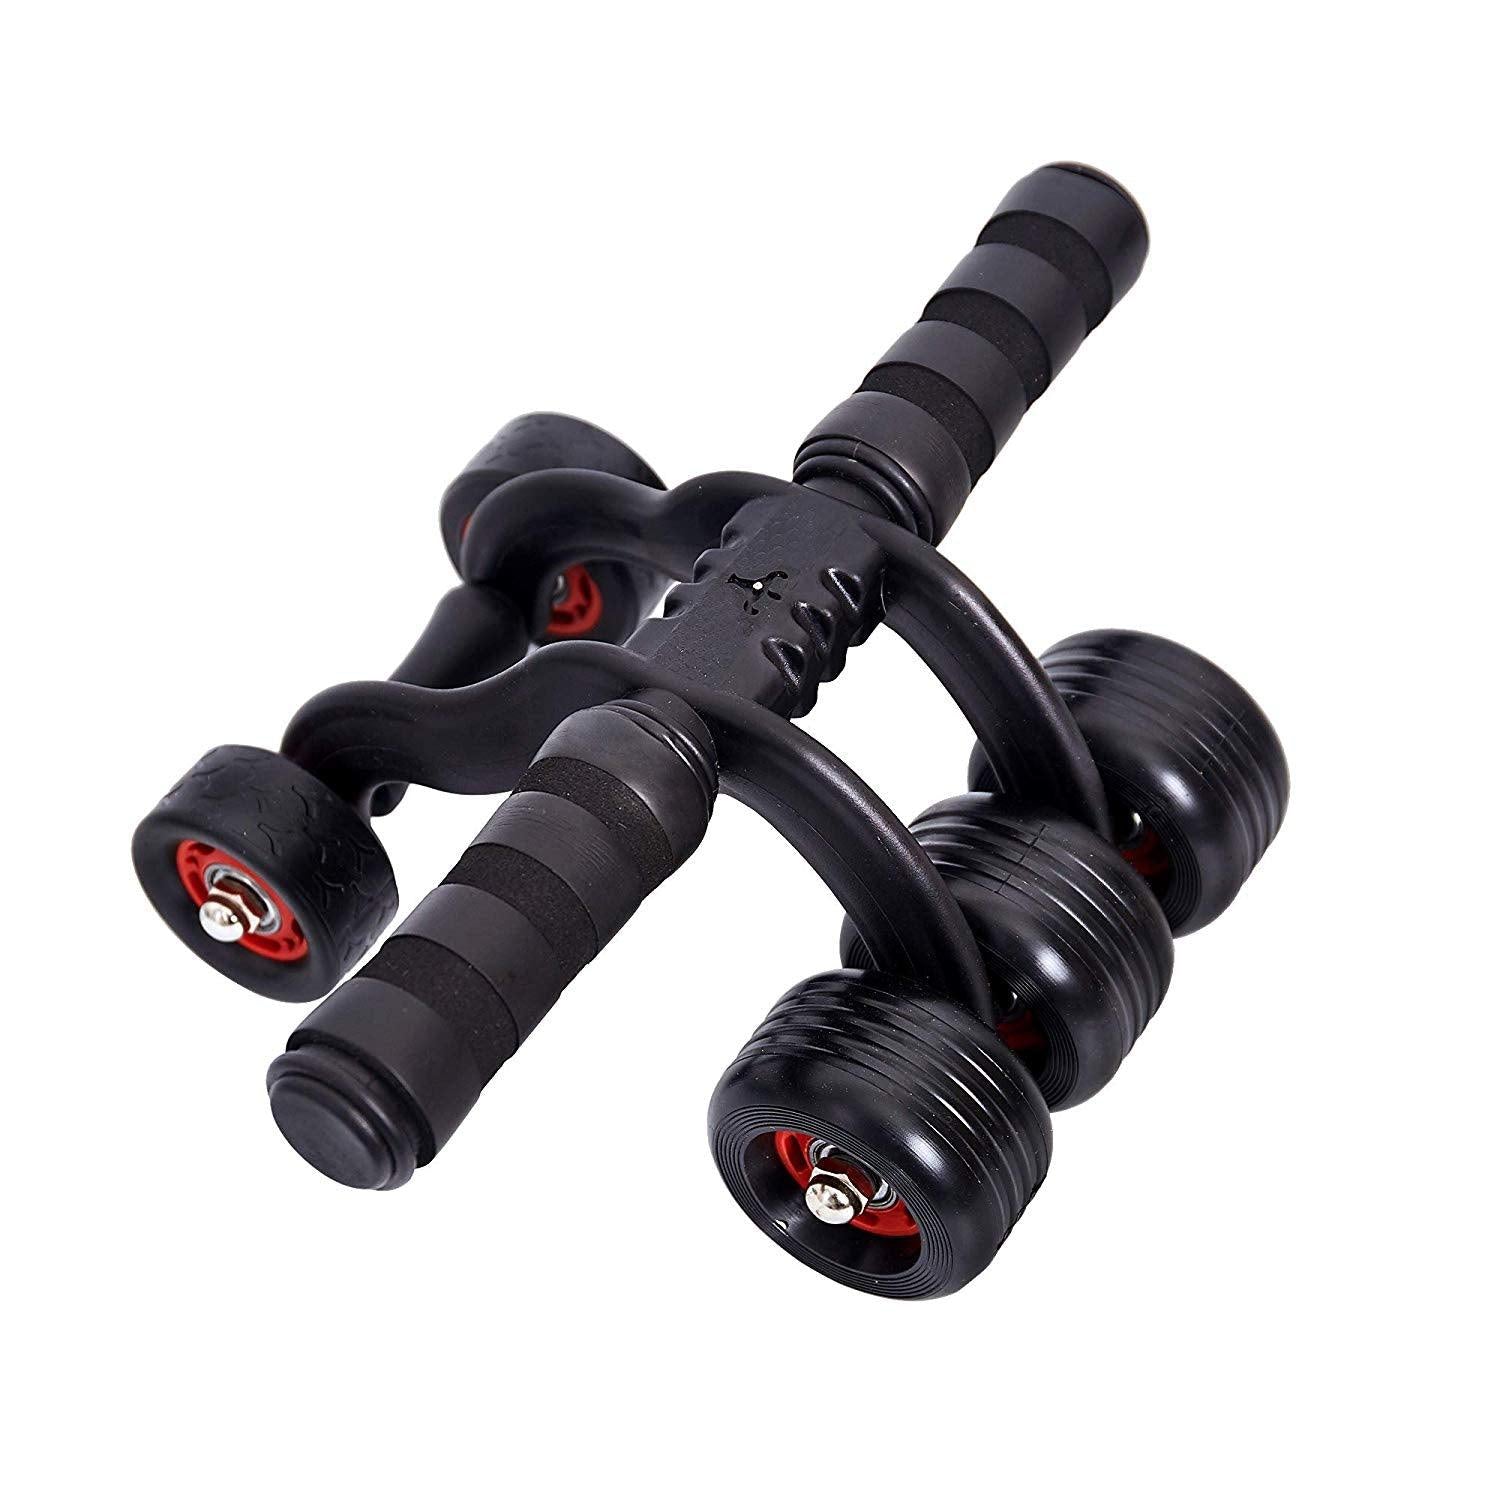 Bosonshop Black AB Wheel Roller with 5 Wheels for Home Gym